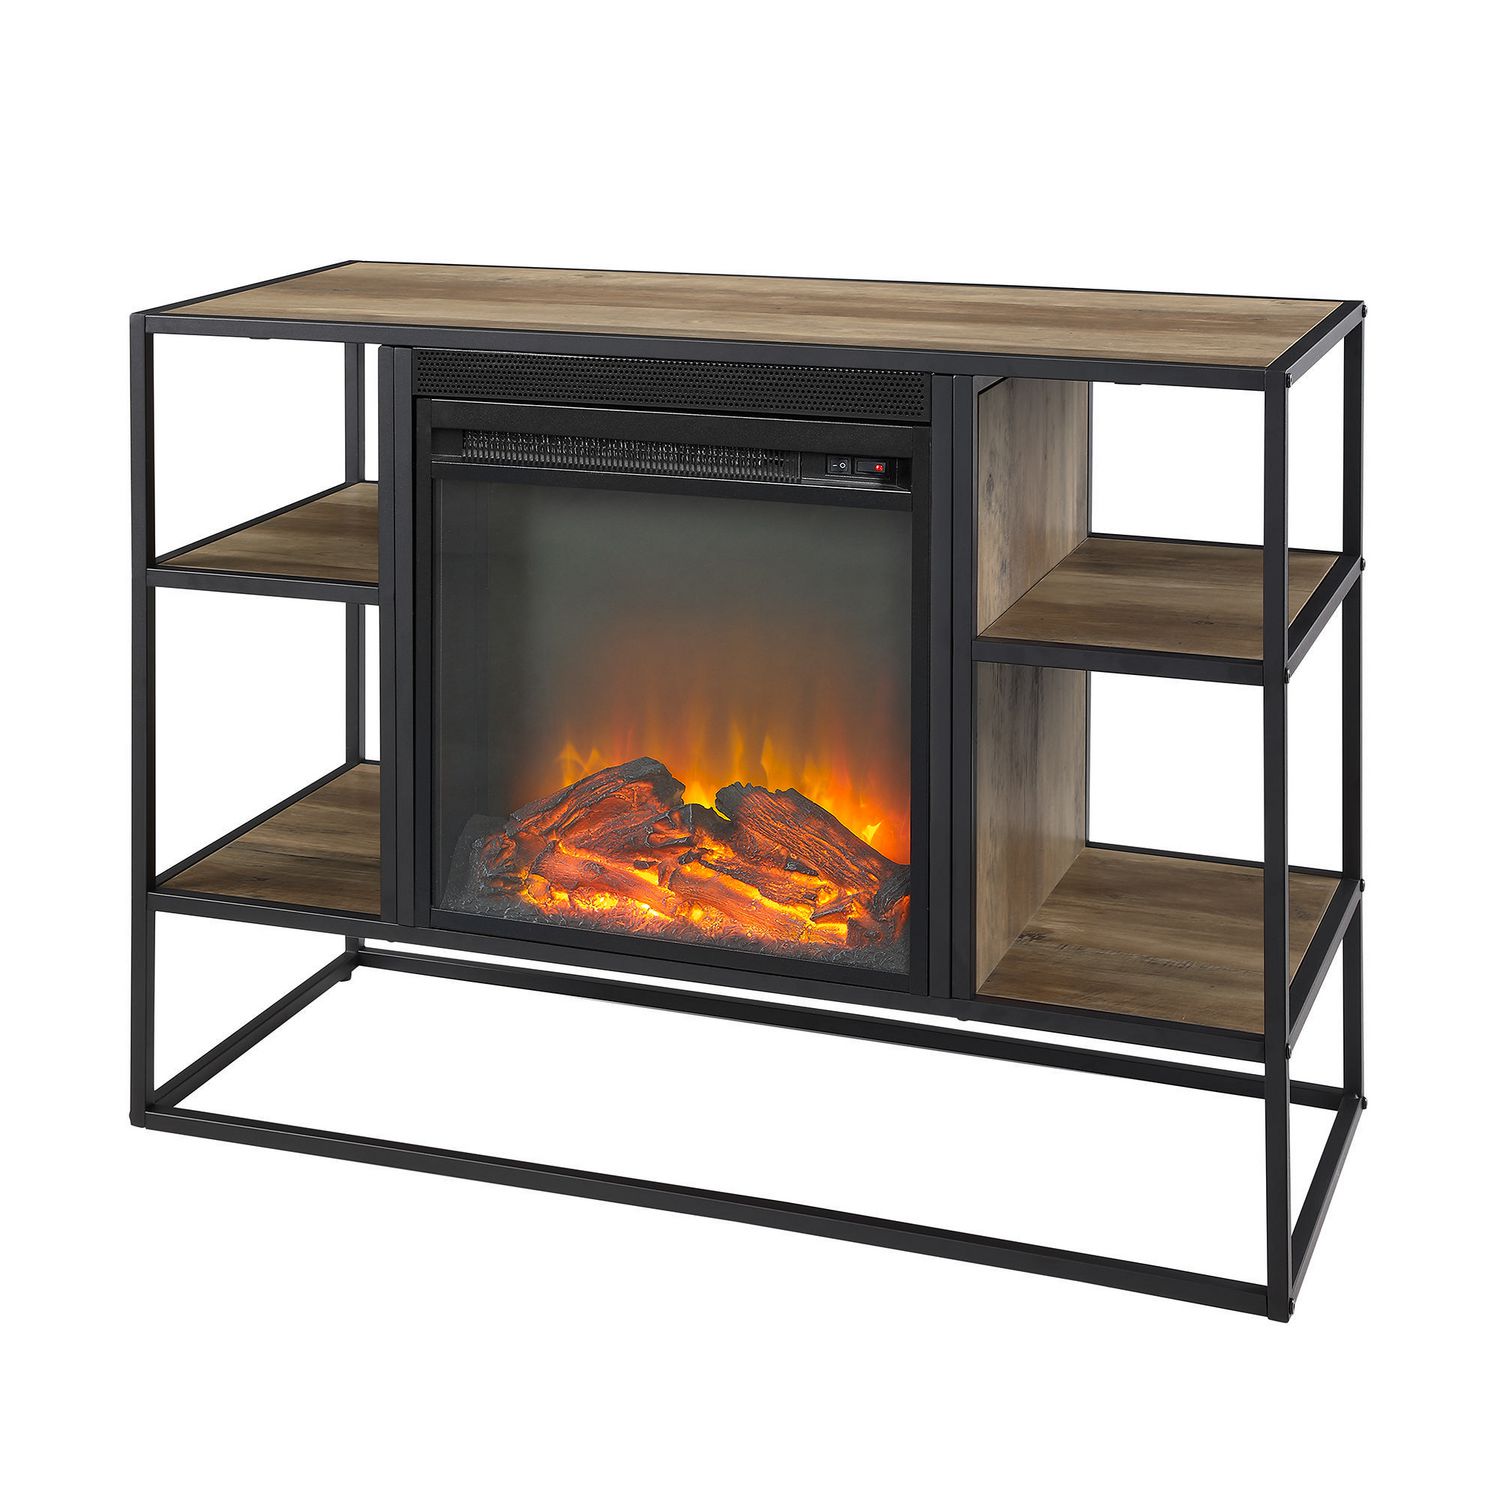 Manor Park Rustic Industrial Fireplace TV Stand for TV's ...